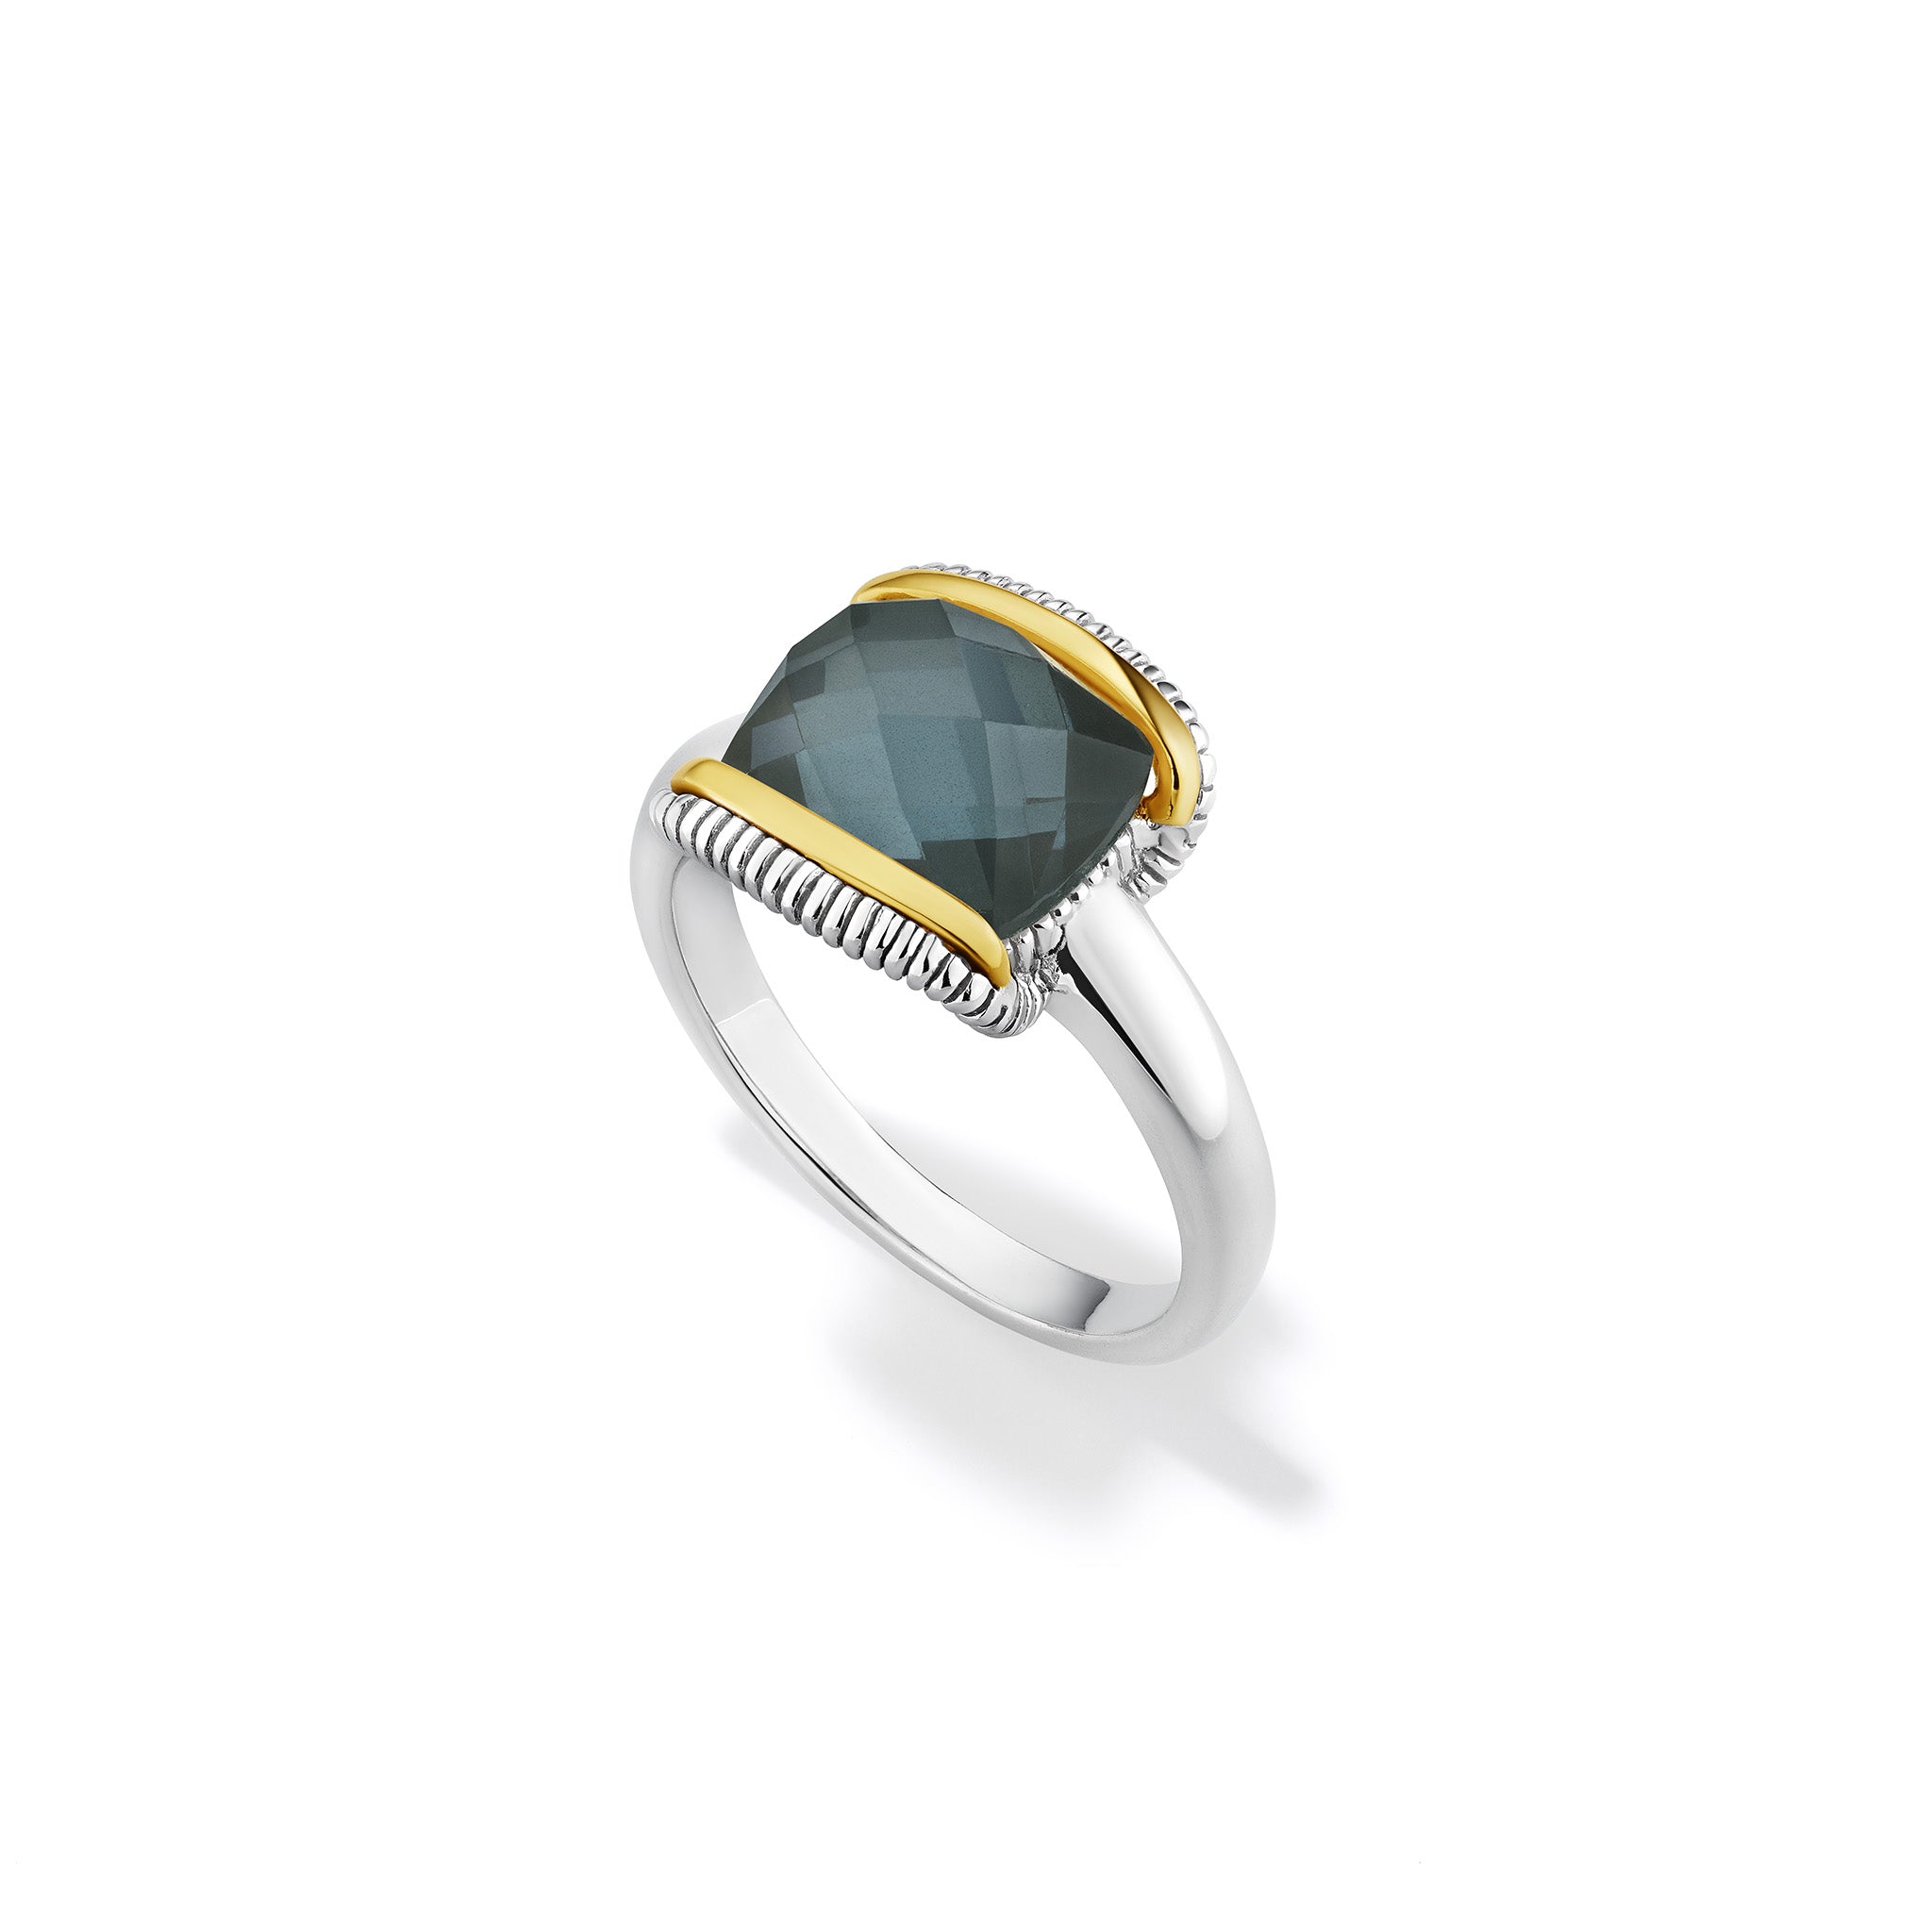 Eternity Ring With Blue Quartz Over Hematite Doublet And 18K Gold